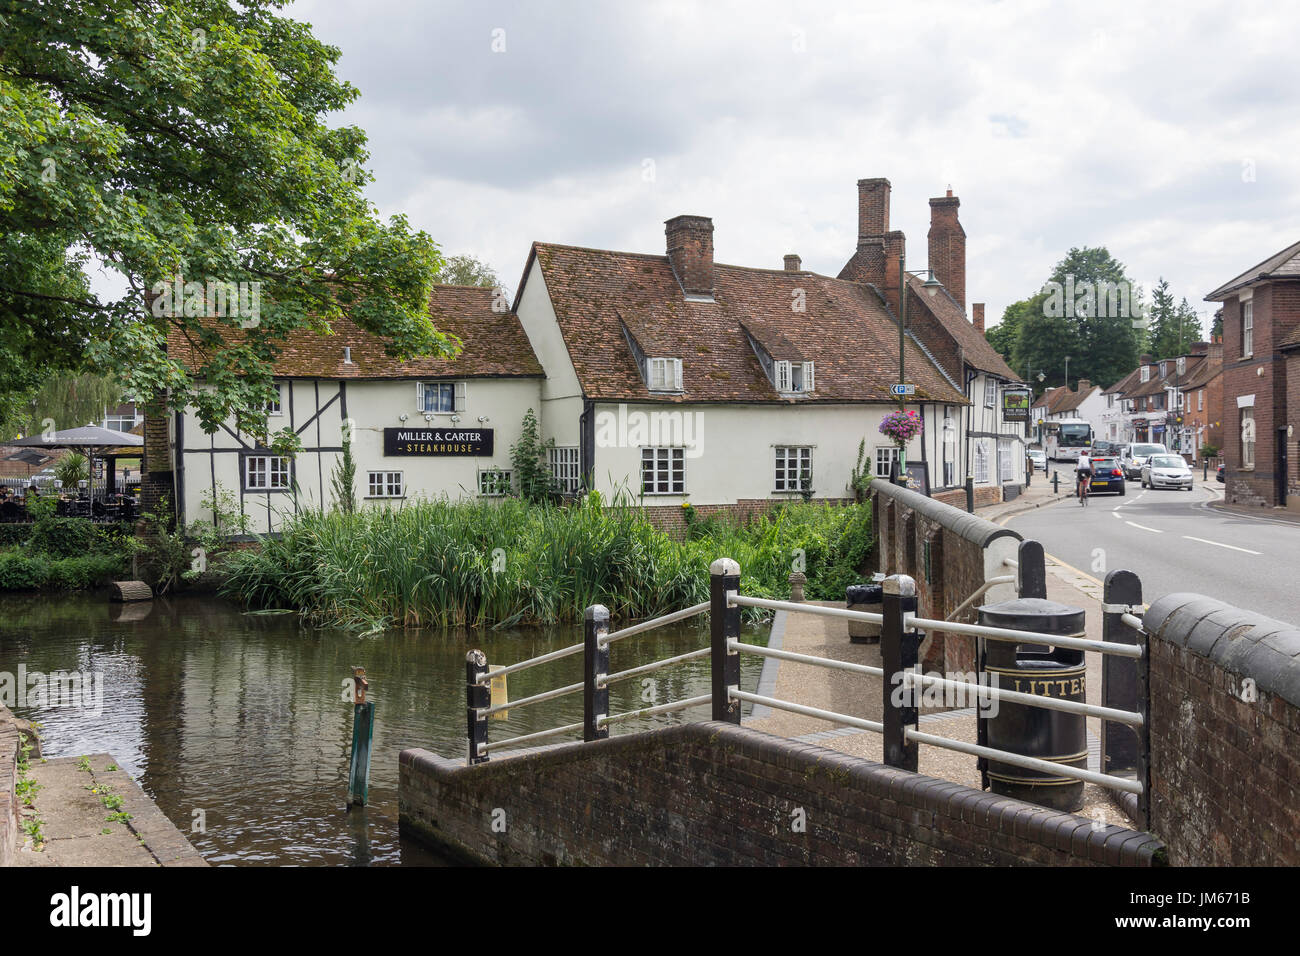 River Lee and The Bull Pub (Miller & Carter Steakhouse), High Street, Wheathampstead, Hertfordshire, England, United Kingdom Stock Photo